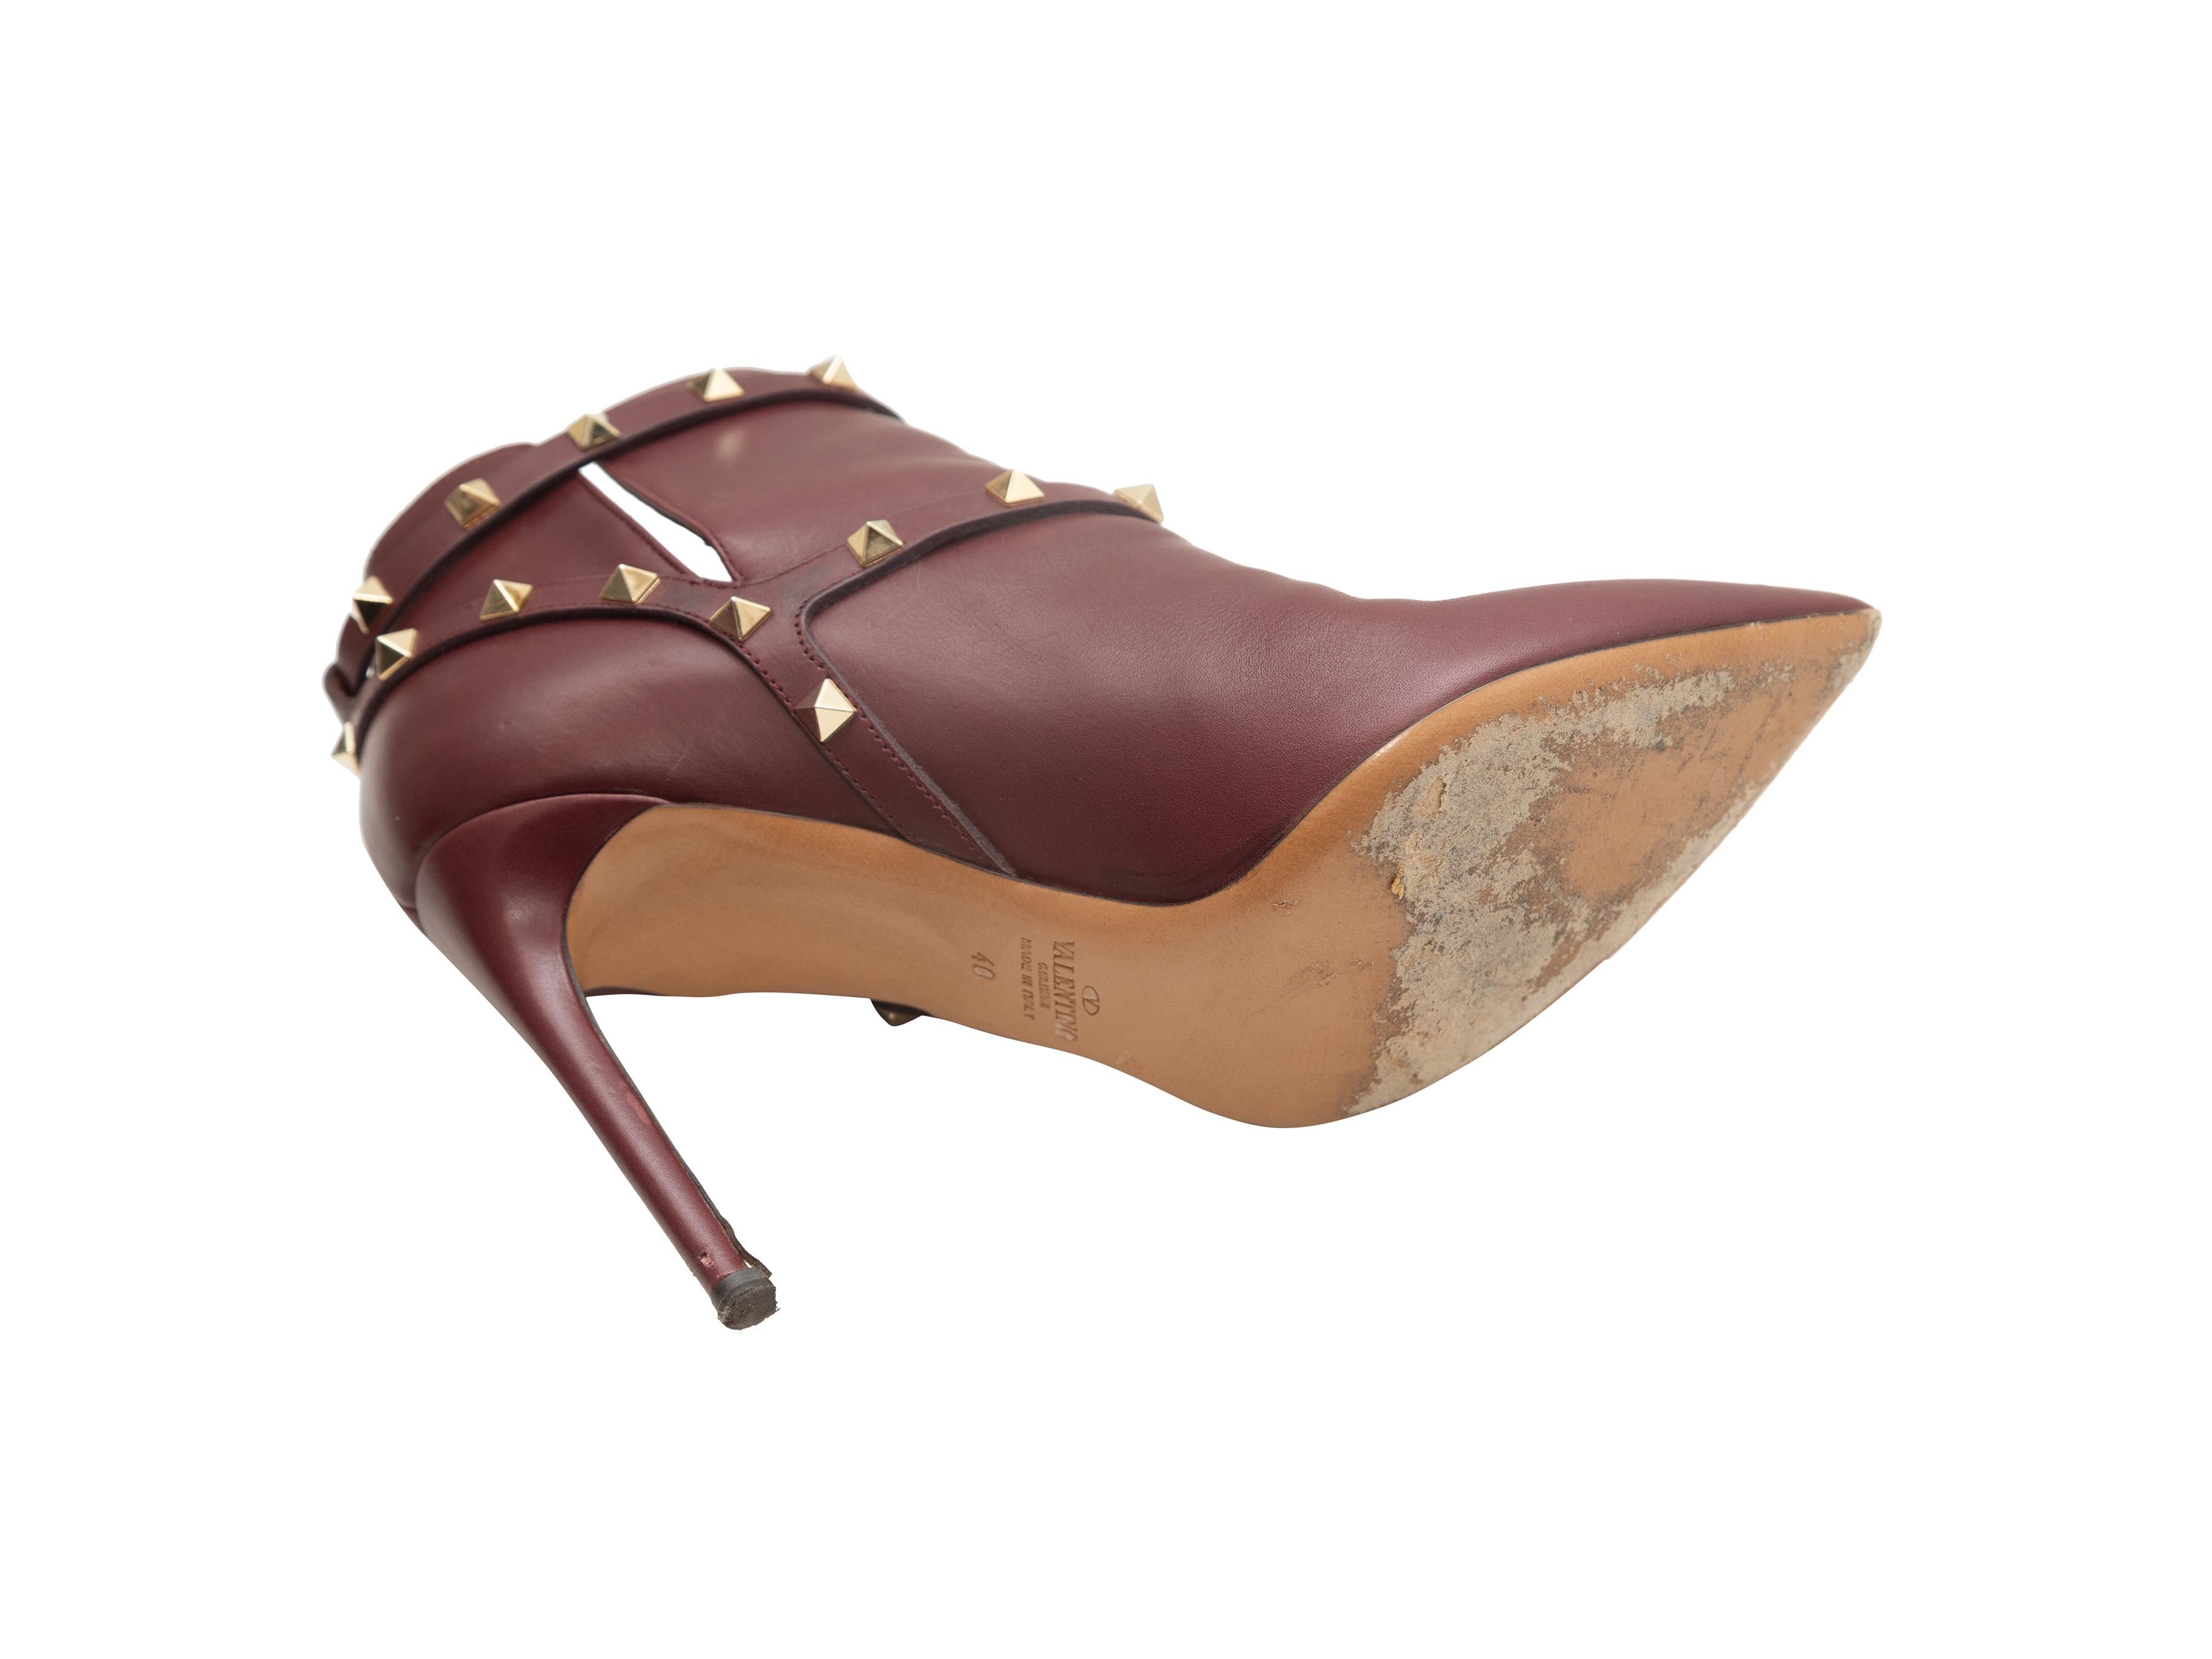 Product details: Burgundy leather pointed-toe booties by Valentino. Gold-tone Rockstud detailing throughout. Designer size 40. 4